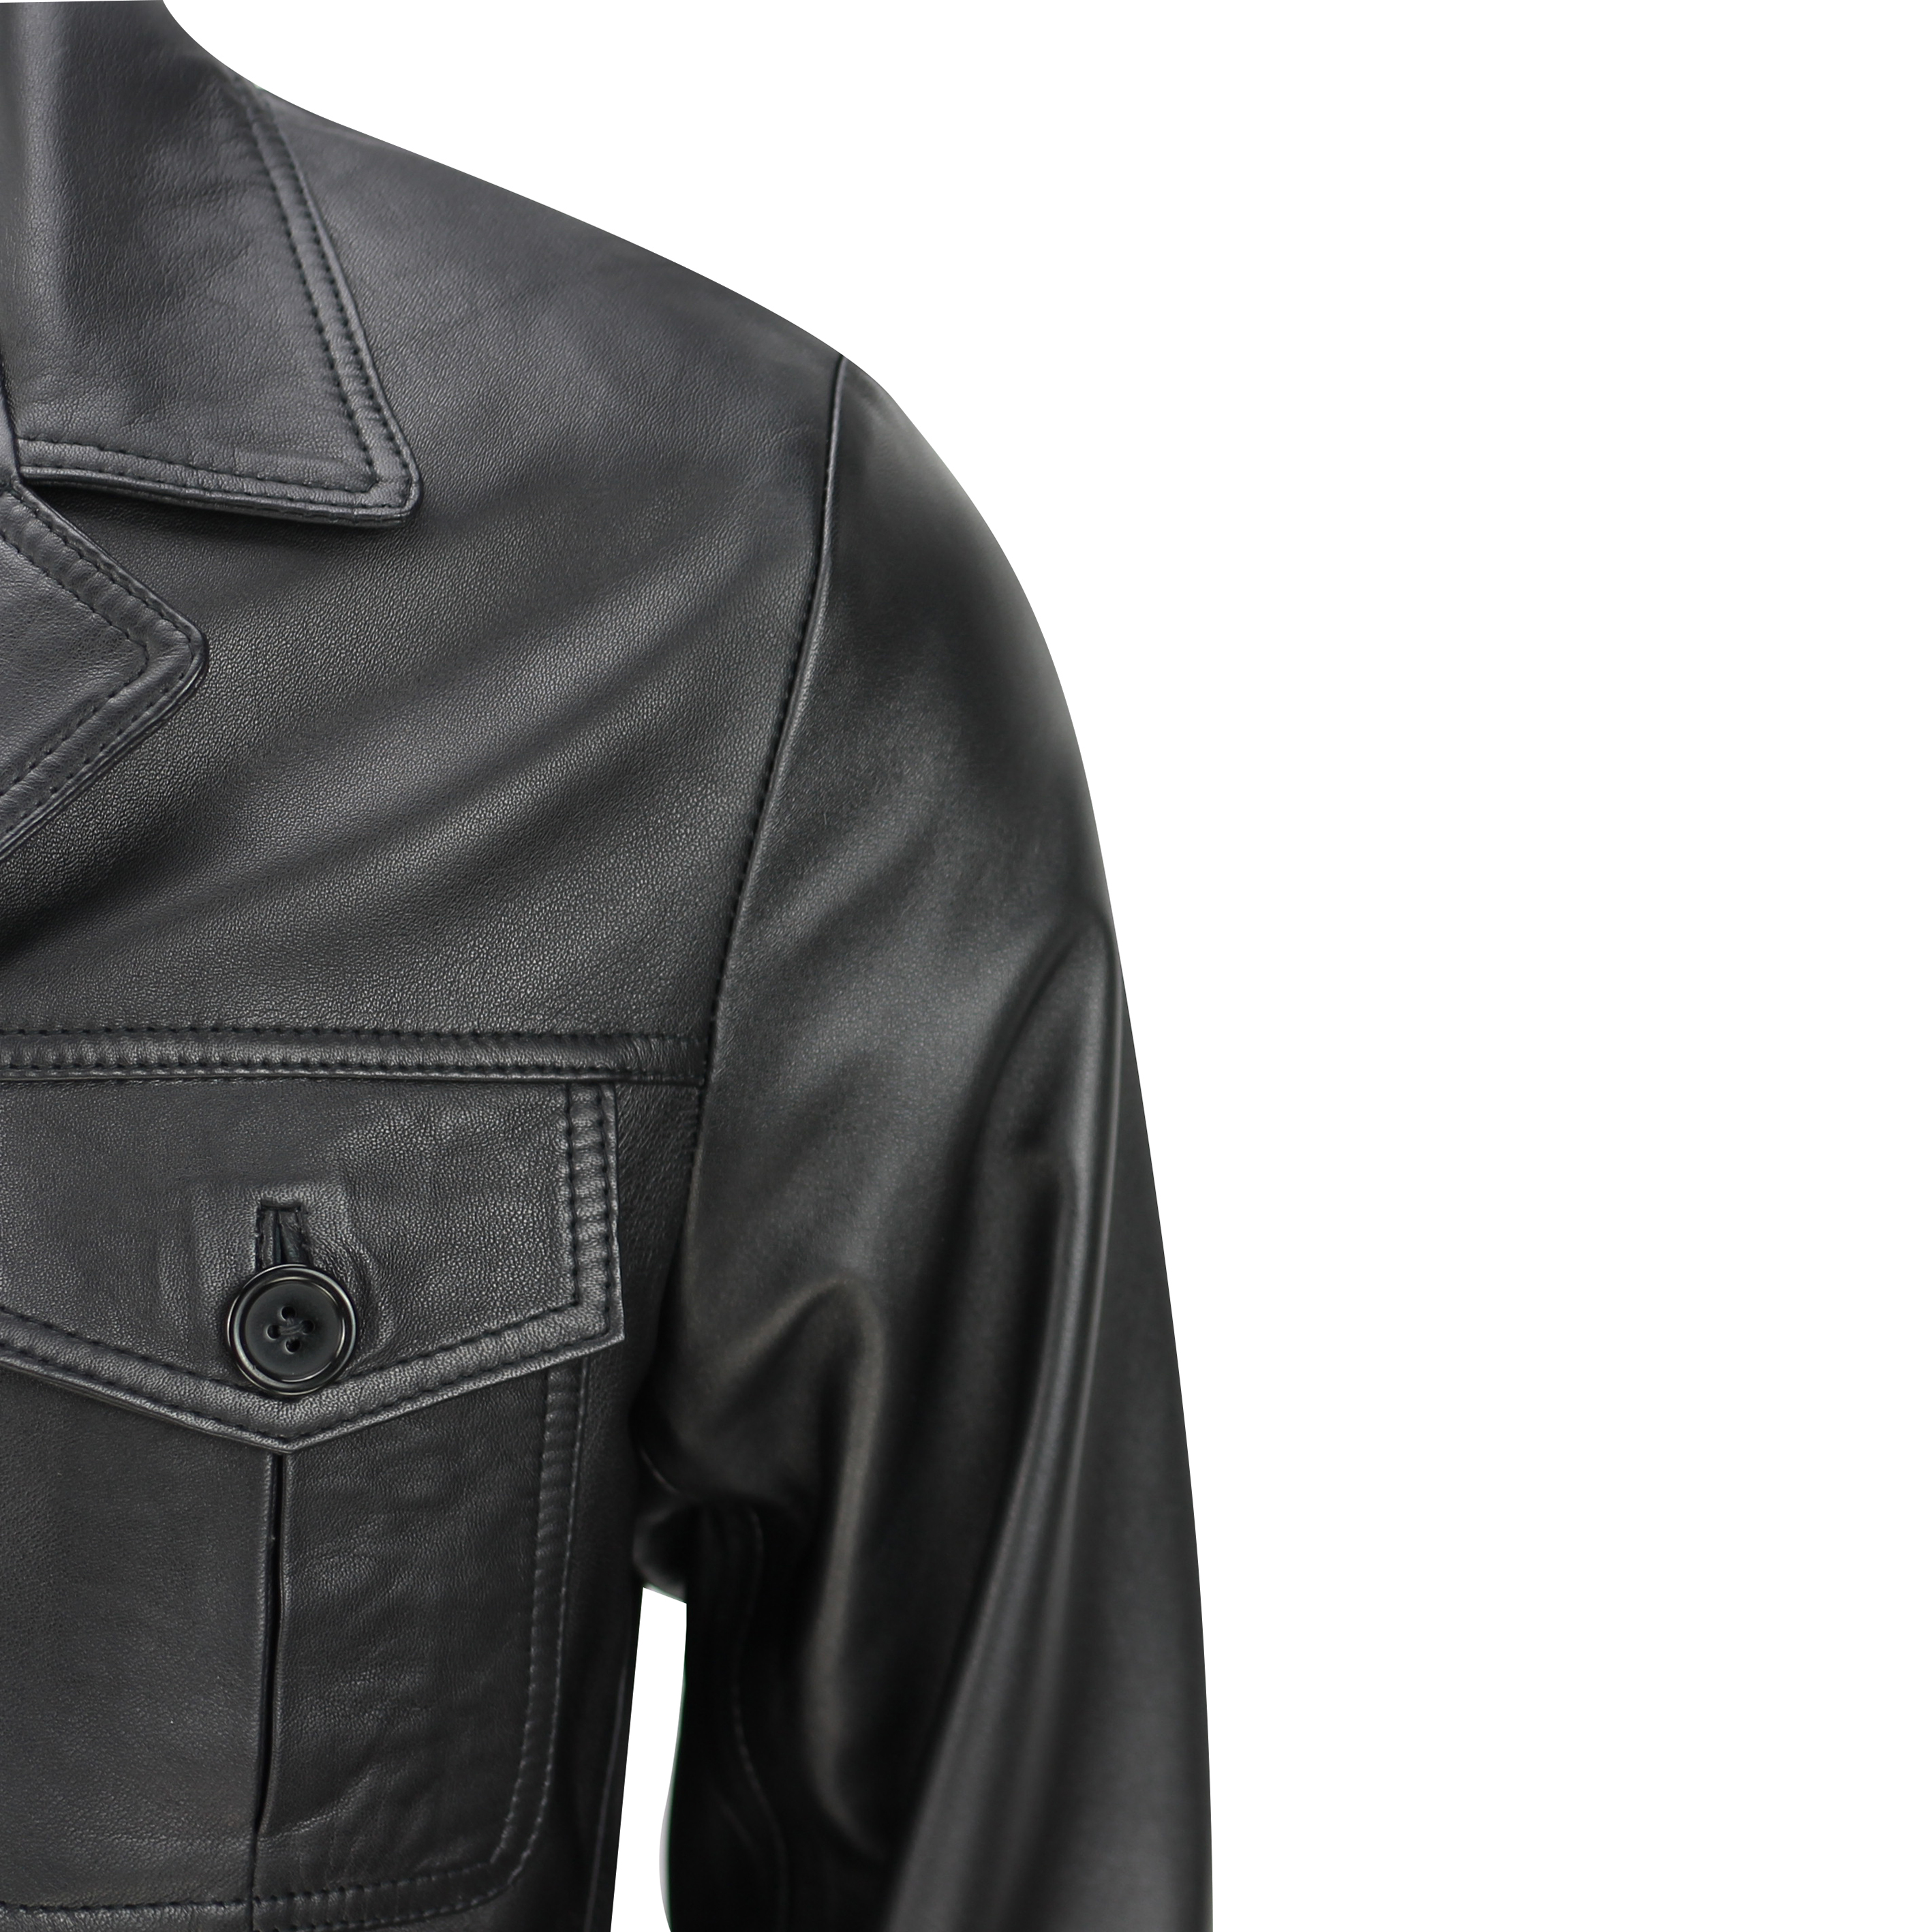 New Mens Black Real Leather 3/4 Mid Length Classic Vintage Military Style Jacket